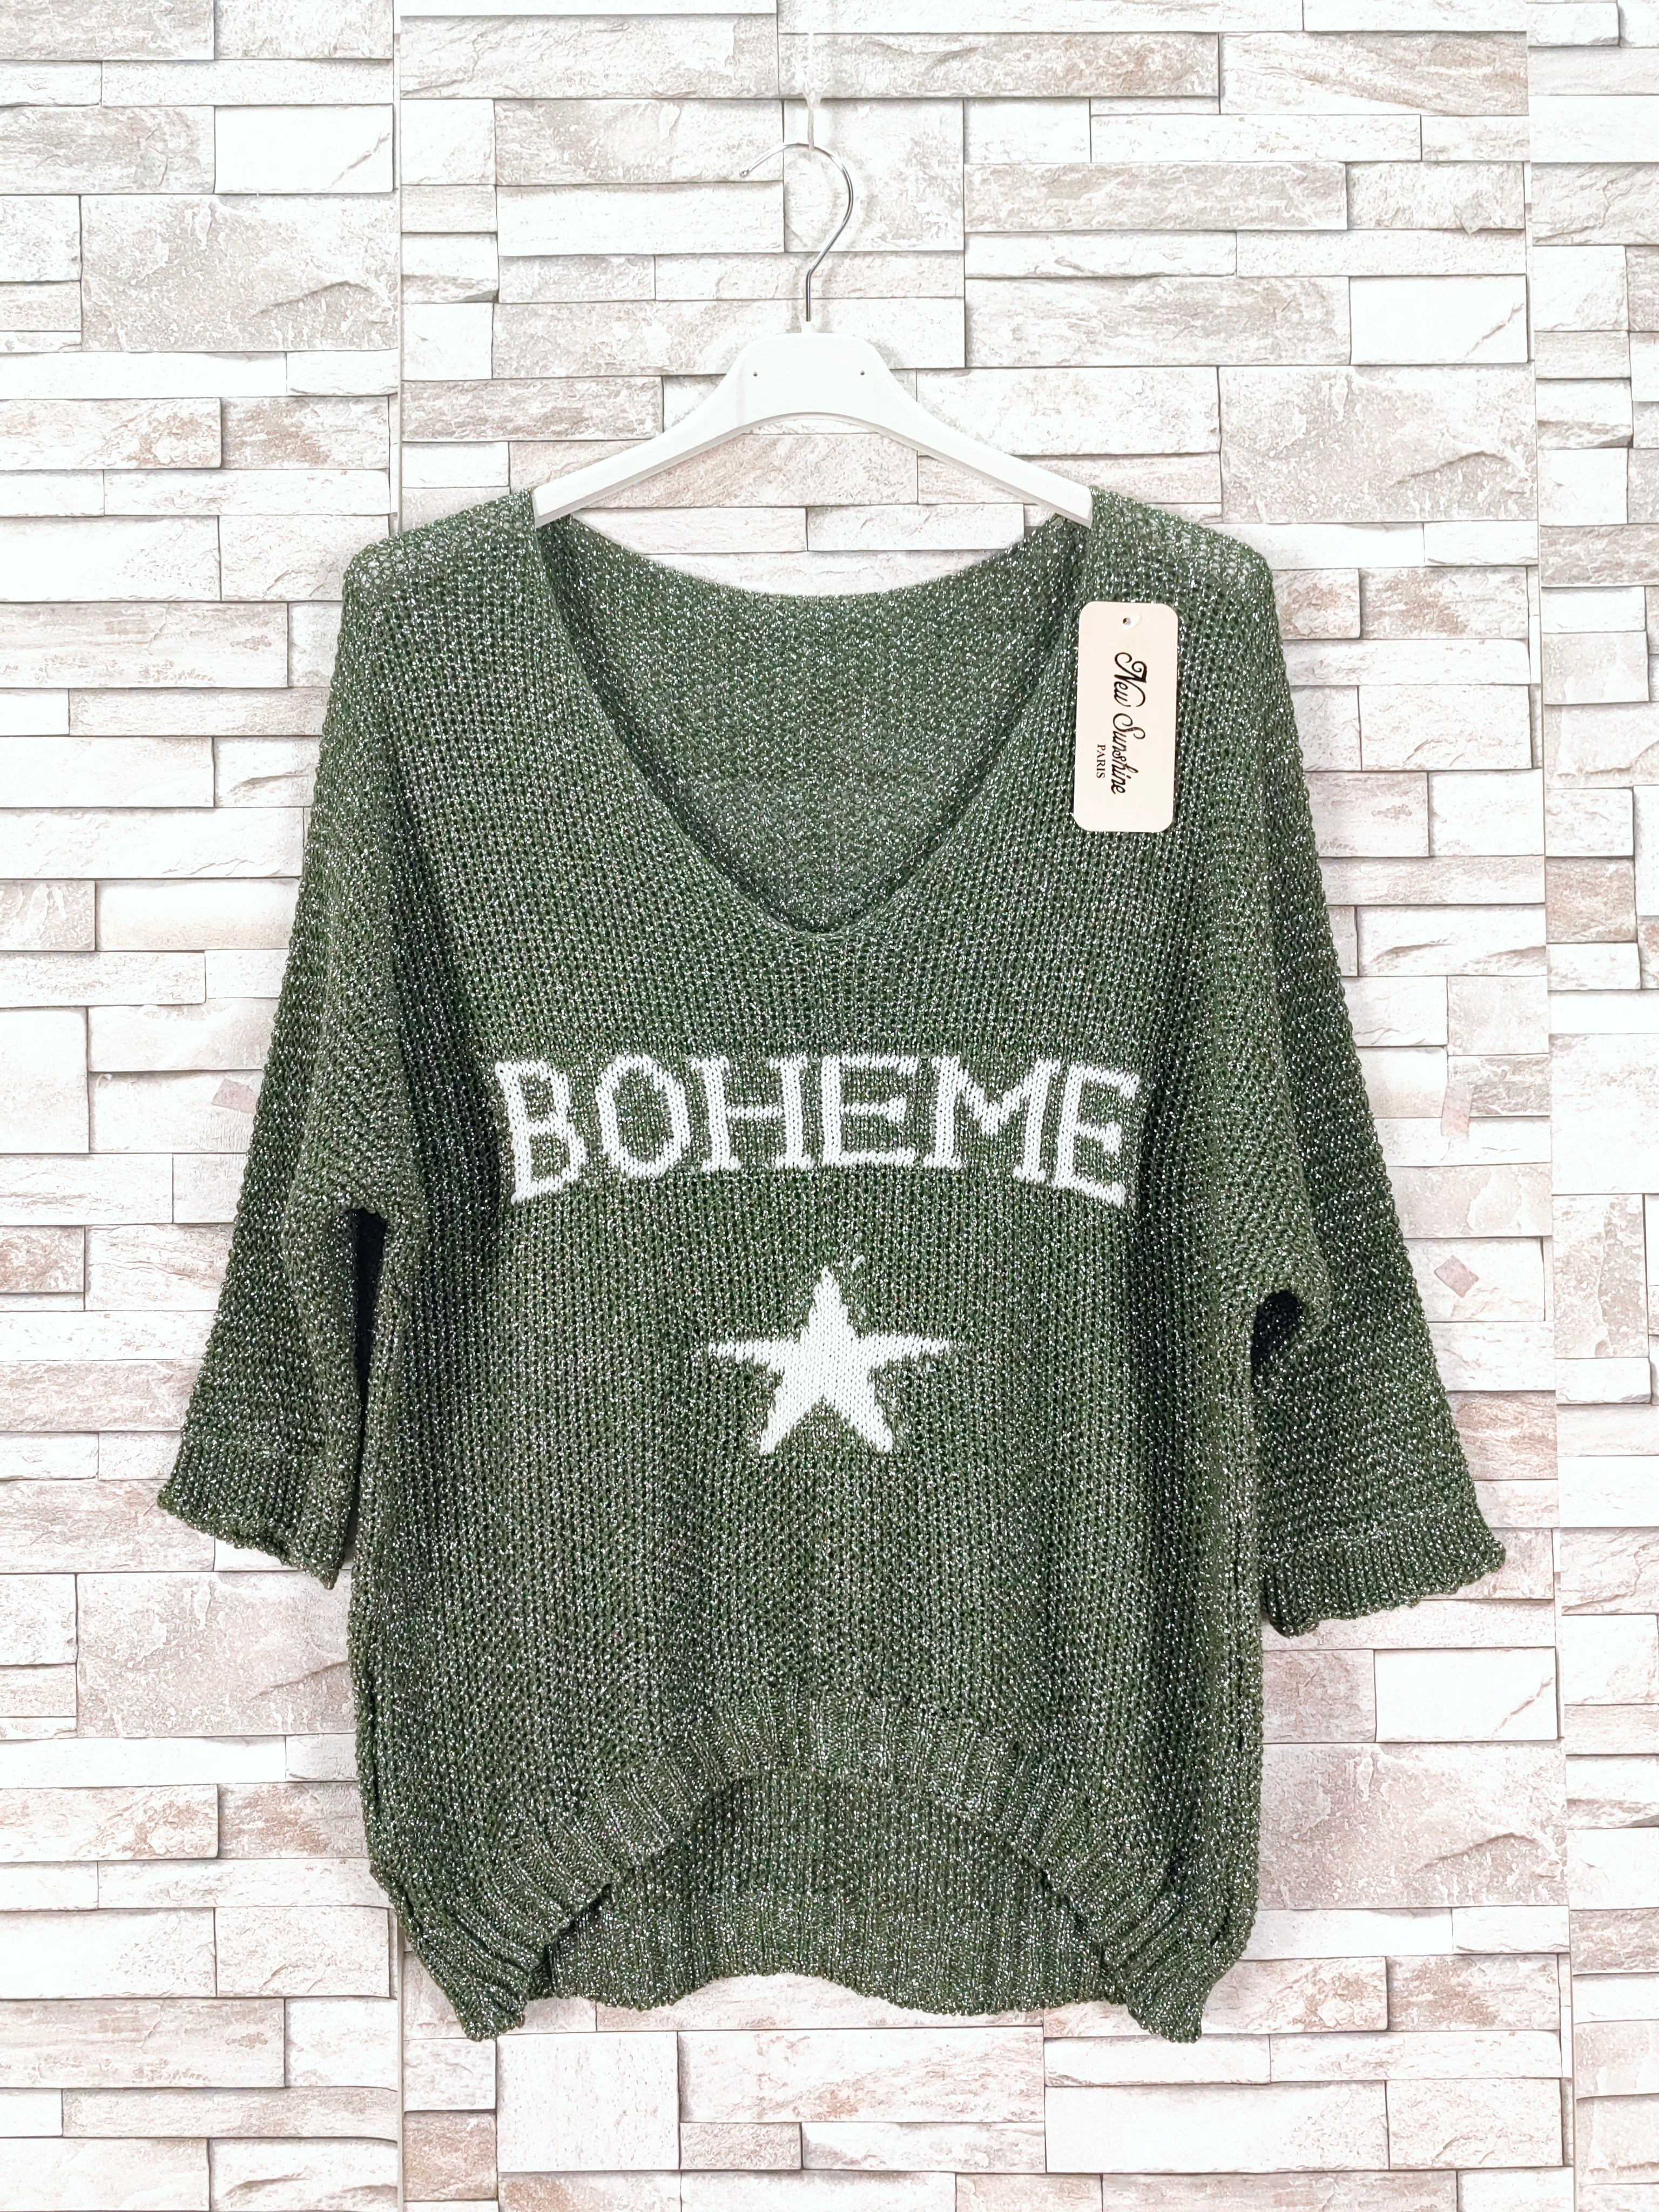 Light sweater with shiny knit (x9)